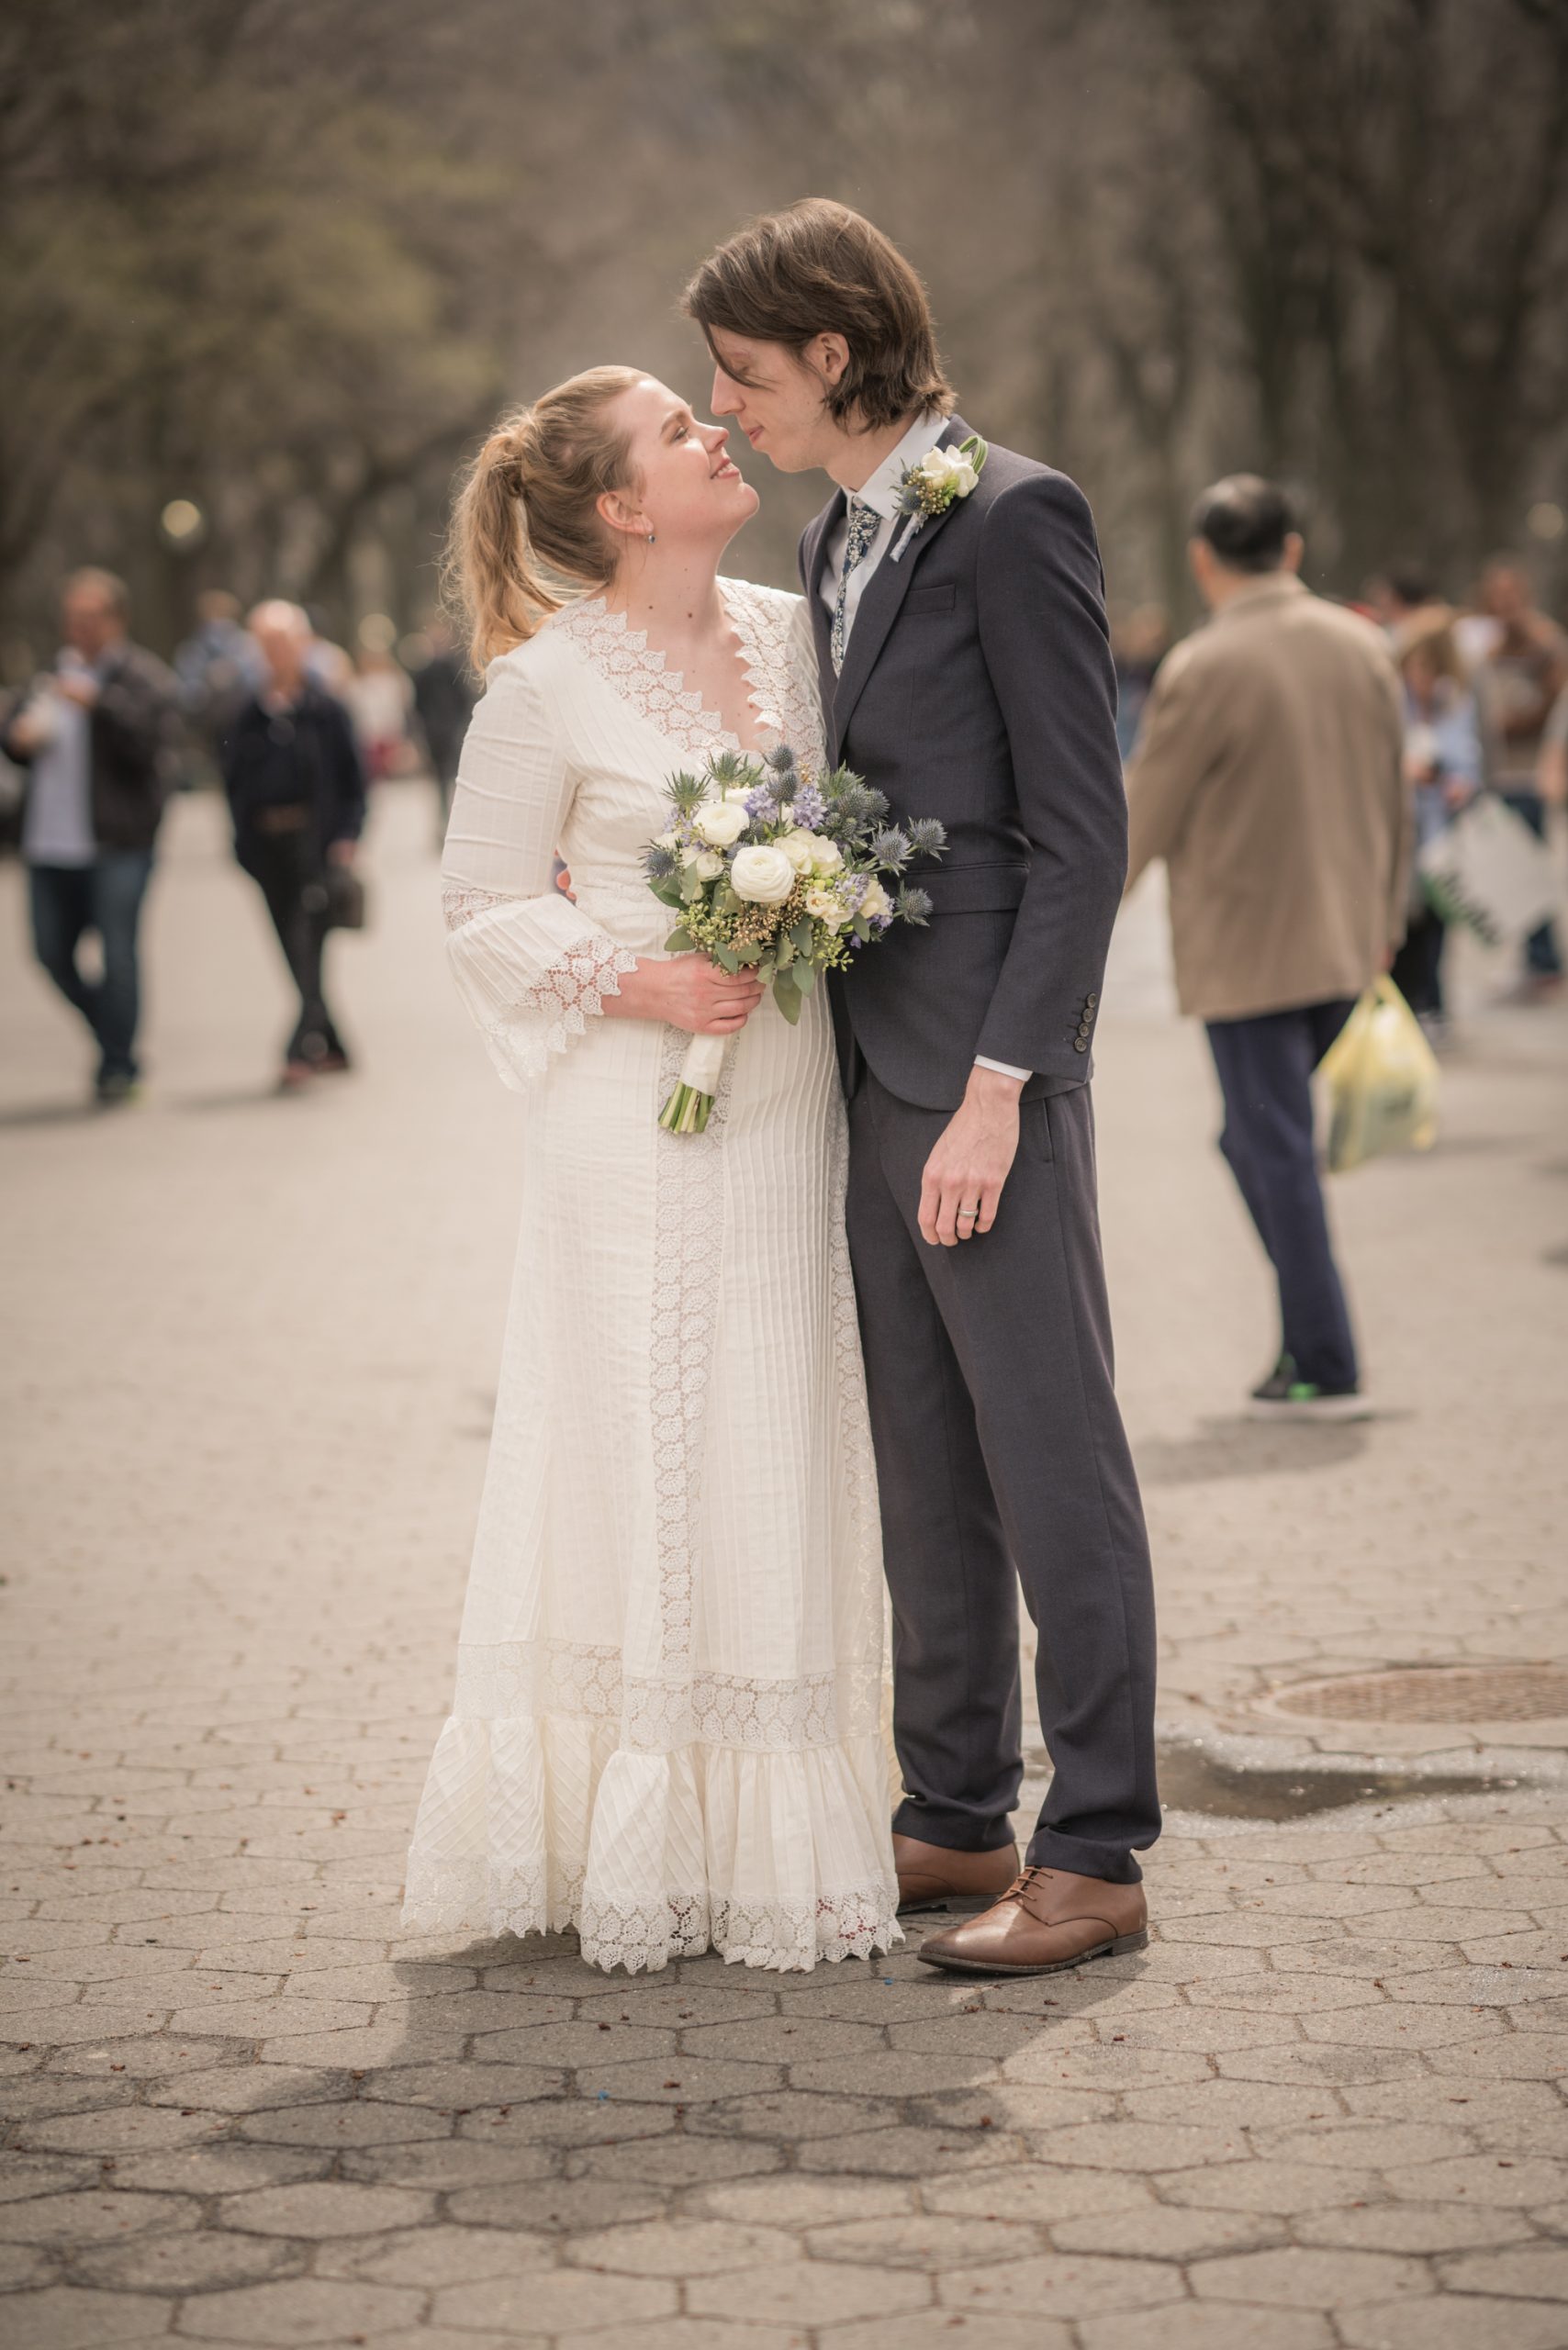 an edited lifestyle wedding elope in new york city